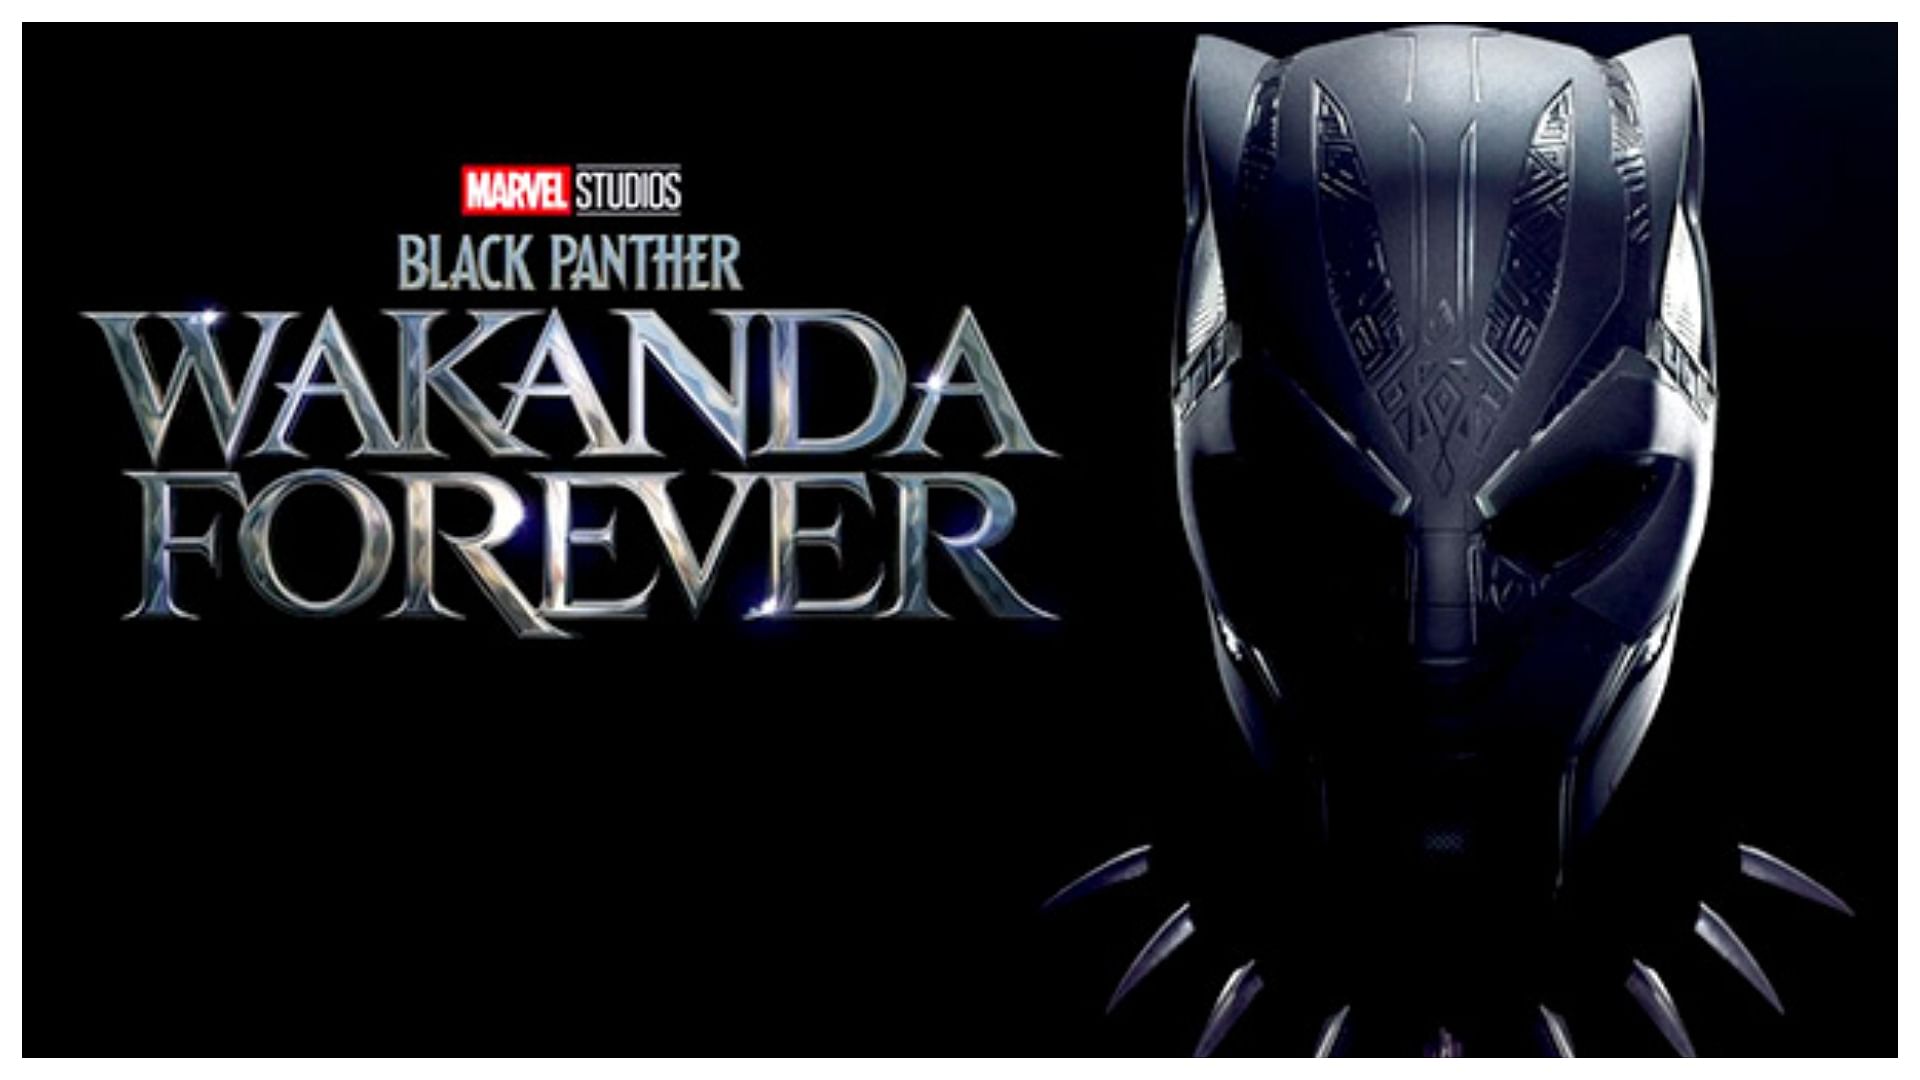 Black Panther Wakanda Forever Day 2 Box Office Collection: Marvel Cinematic  Universe Movie Earning Well - Black Panther 2 Box Office Collection: दूसरे  दिन भी 'ब्लैक पैंथर 2' का रहा जलवा, इतना